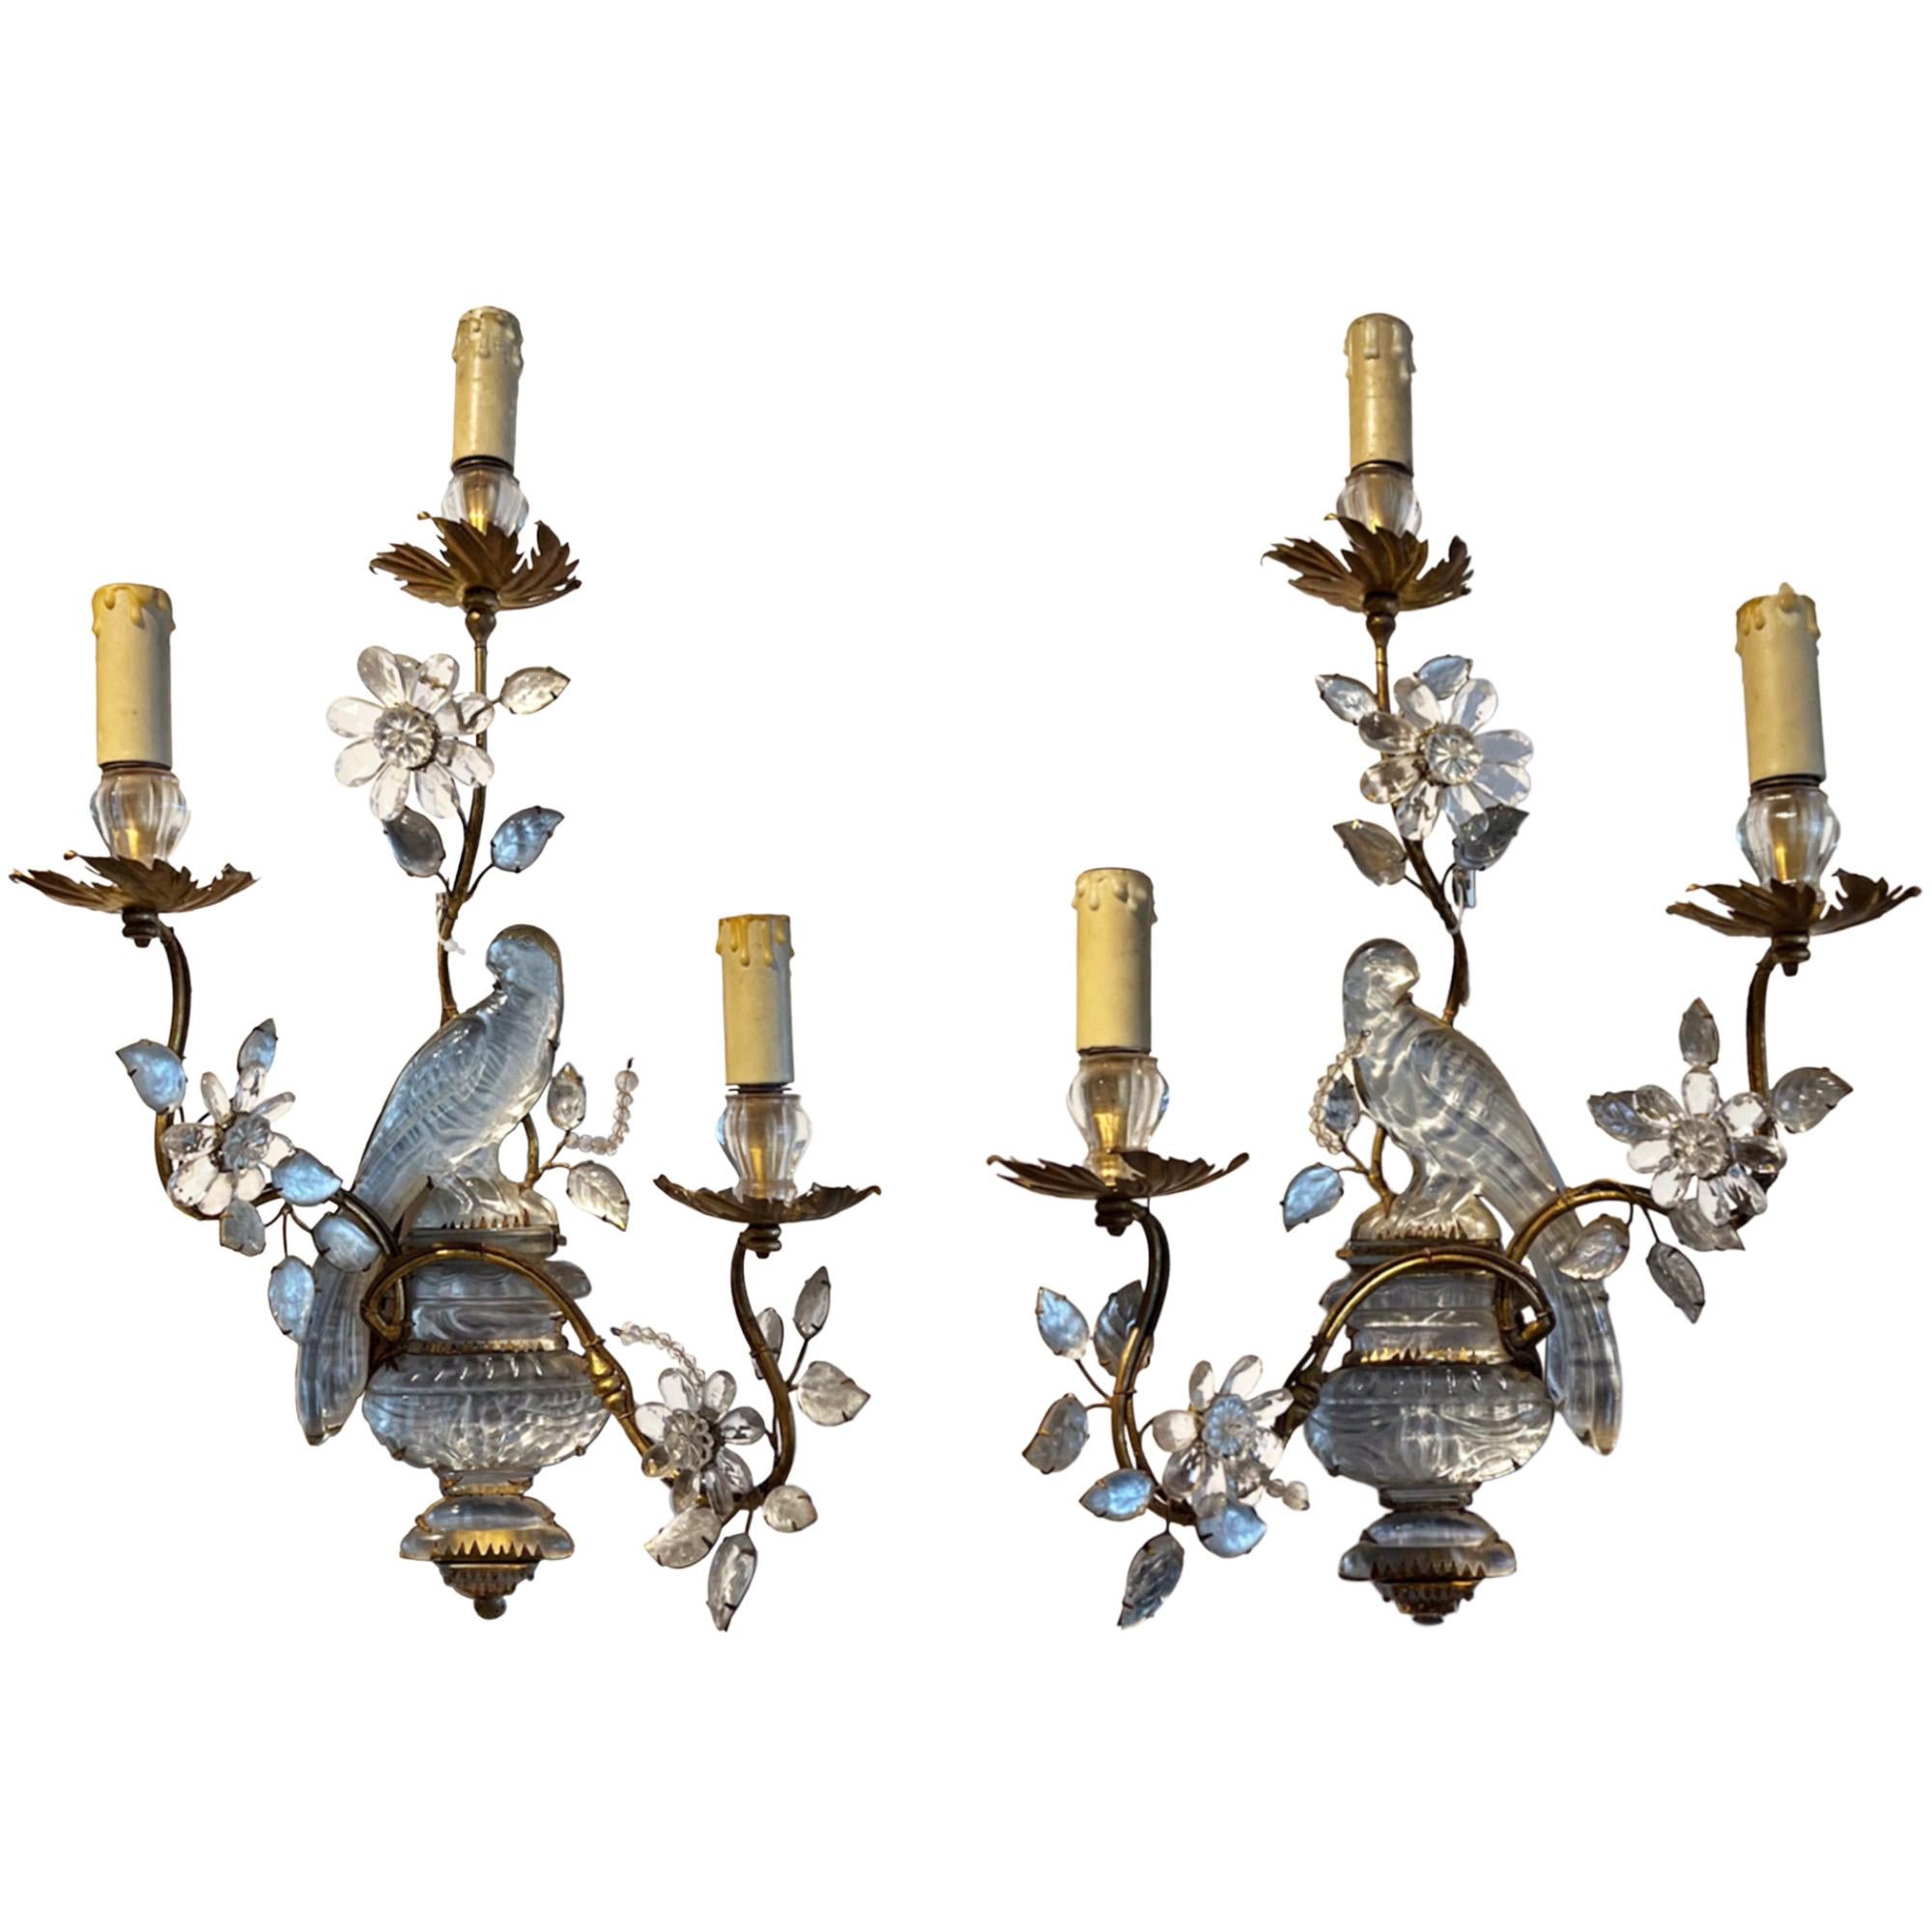 Large Pair of Maison Baguès Wall Sconces With Parrot, Urns & 3 Torches For Sale 2